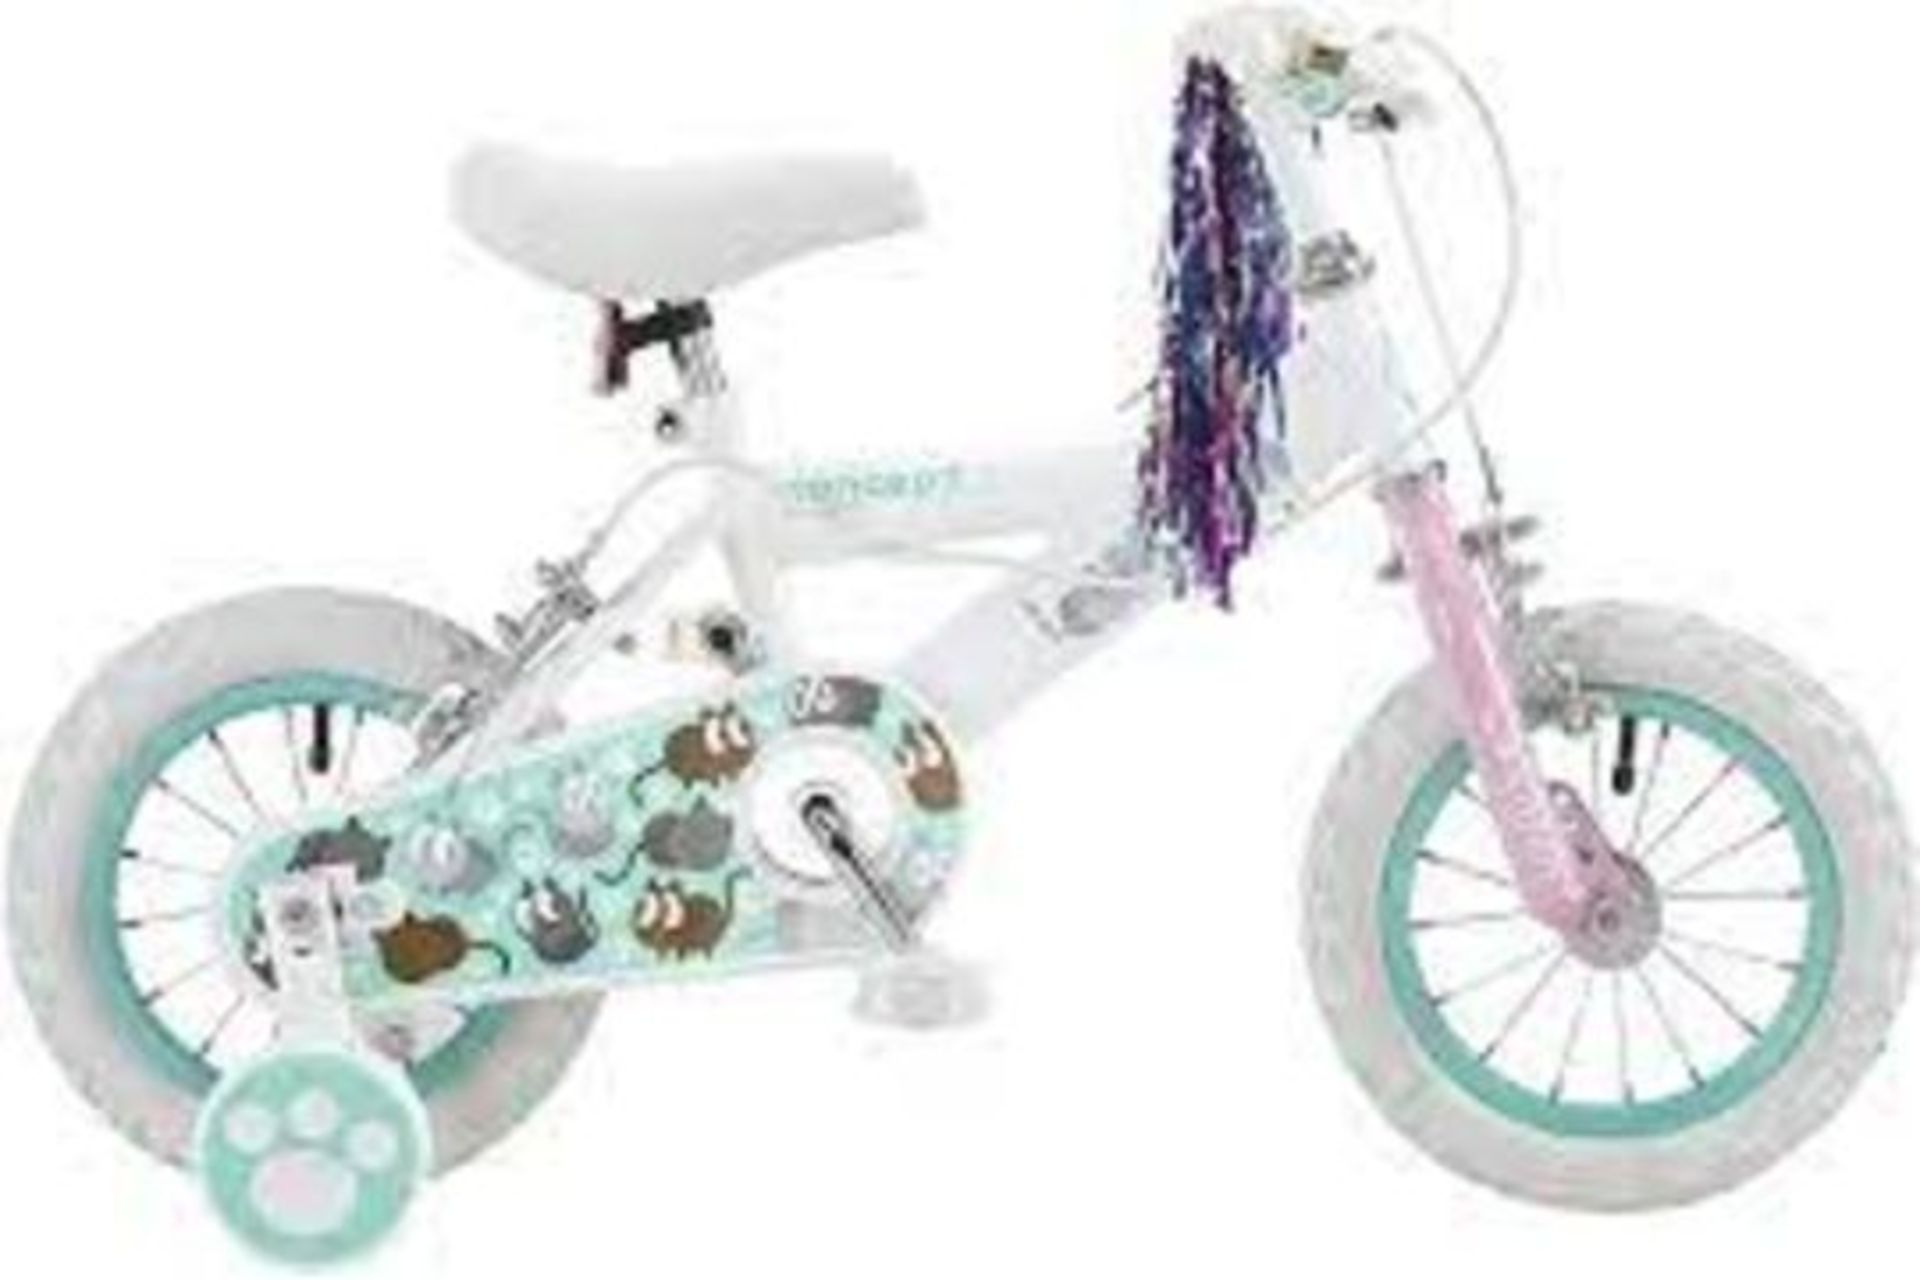 NEW BOXED Insync Kitten 12" Wheel Girls Bicycle RRP £149.99 (ROW7). Has a full chain guard which